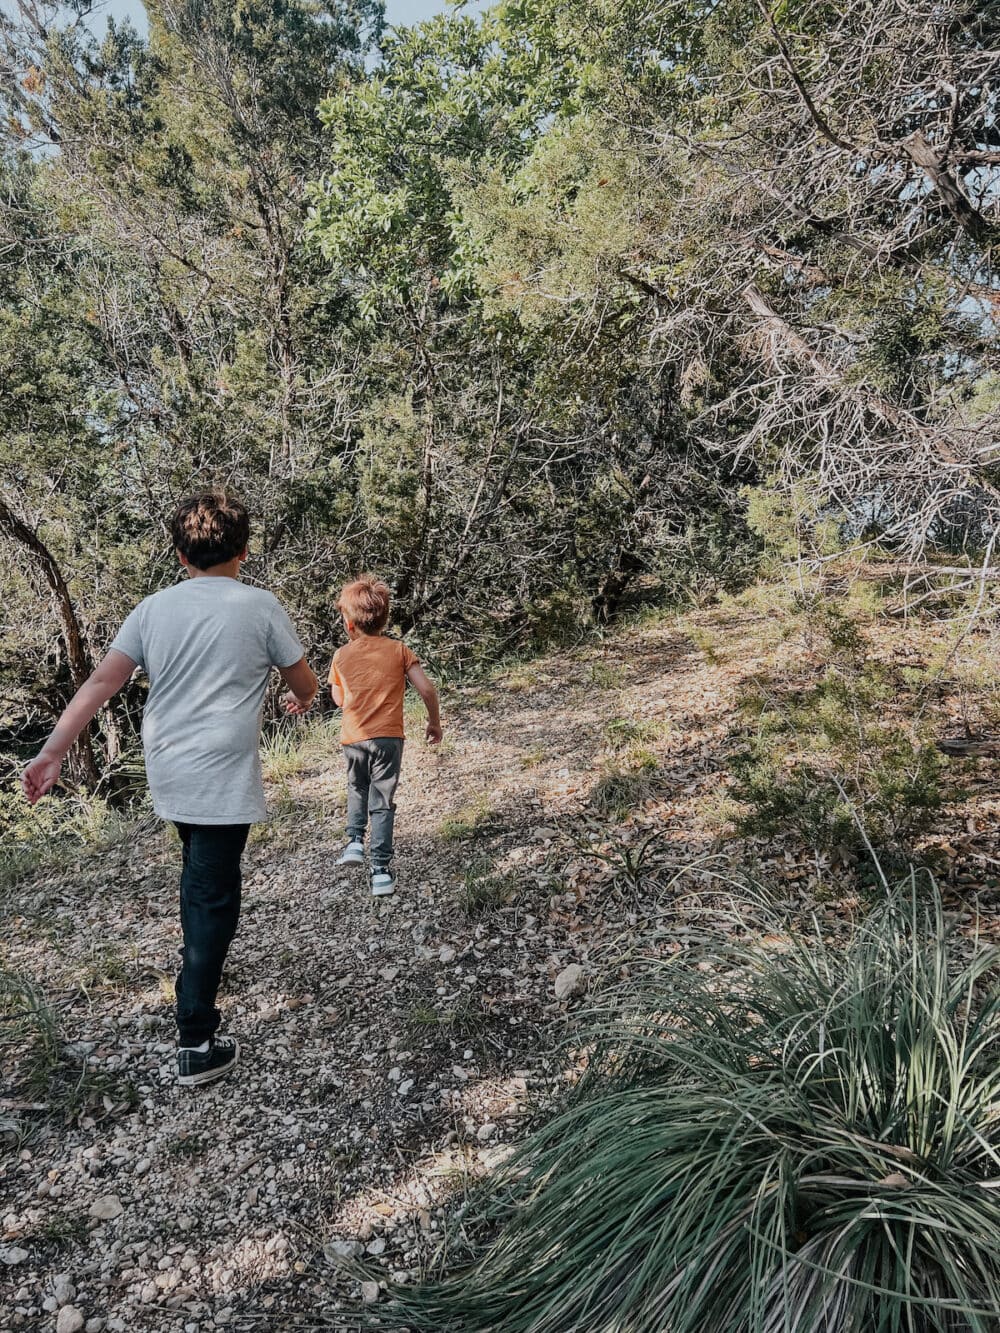 two young boys walking through a trail in a wooded area